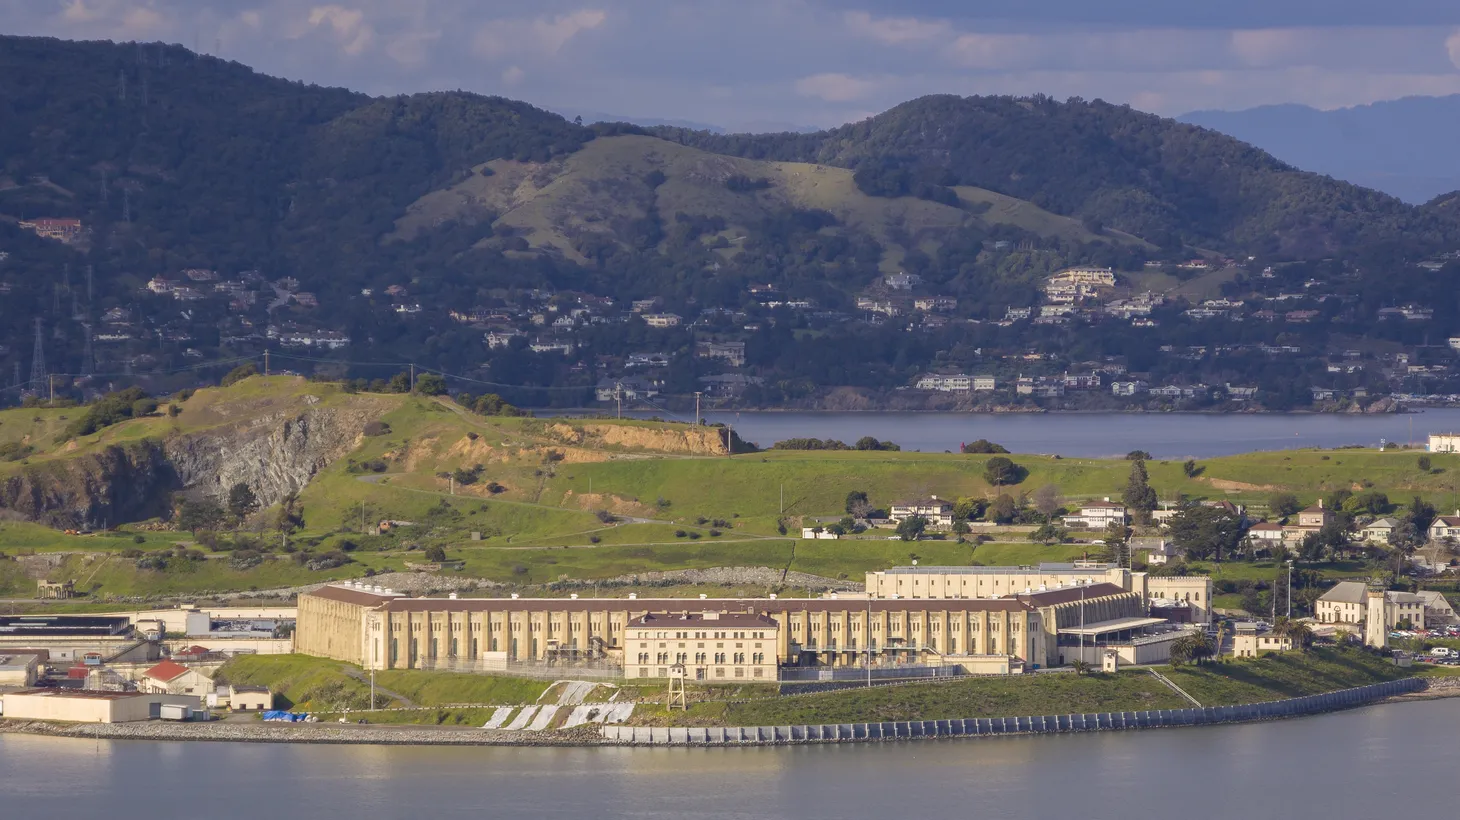 San Quentin State Penitentiary is located in Marin County, north of San Francisco. “In many ways, [it’s] a waste to have a prison there where people don't enjoy the seaview and are incarcerated in terrible conditions,” says Hadar Aviram, law professor at UC Hastings.